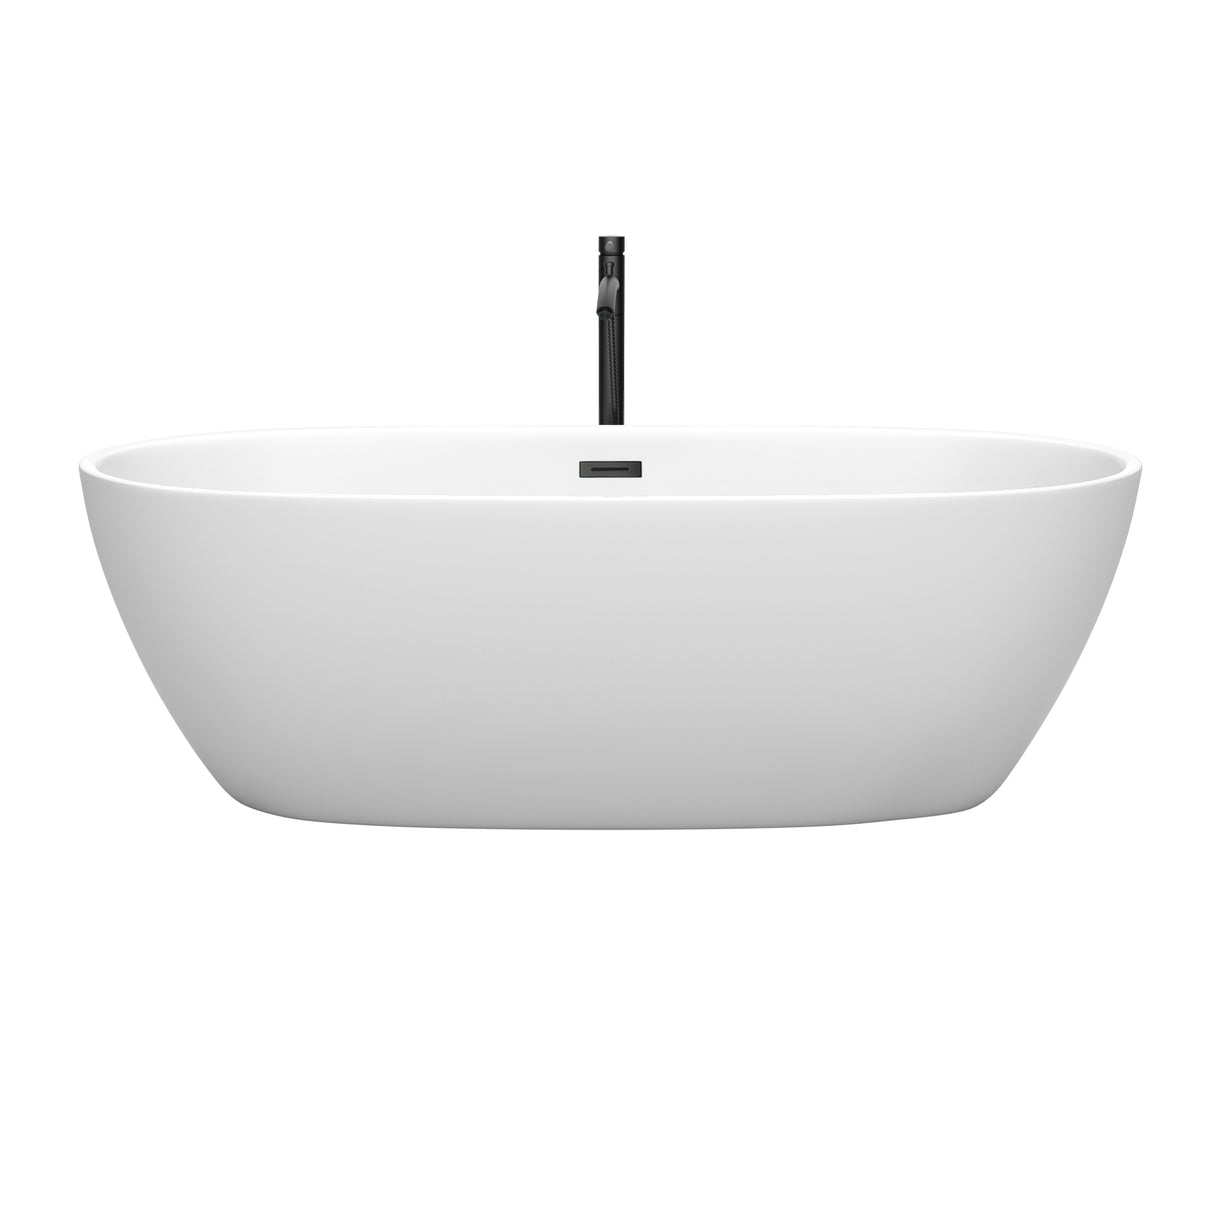 Juno 71 Inch Freestanding Bathtub in Matte White with Floor Mounted Faucet Drain and Overflow Trim in Matte Black